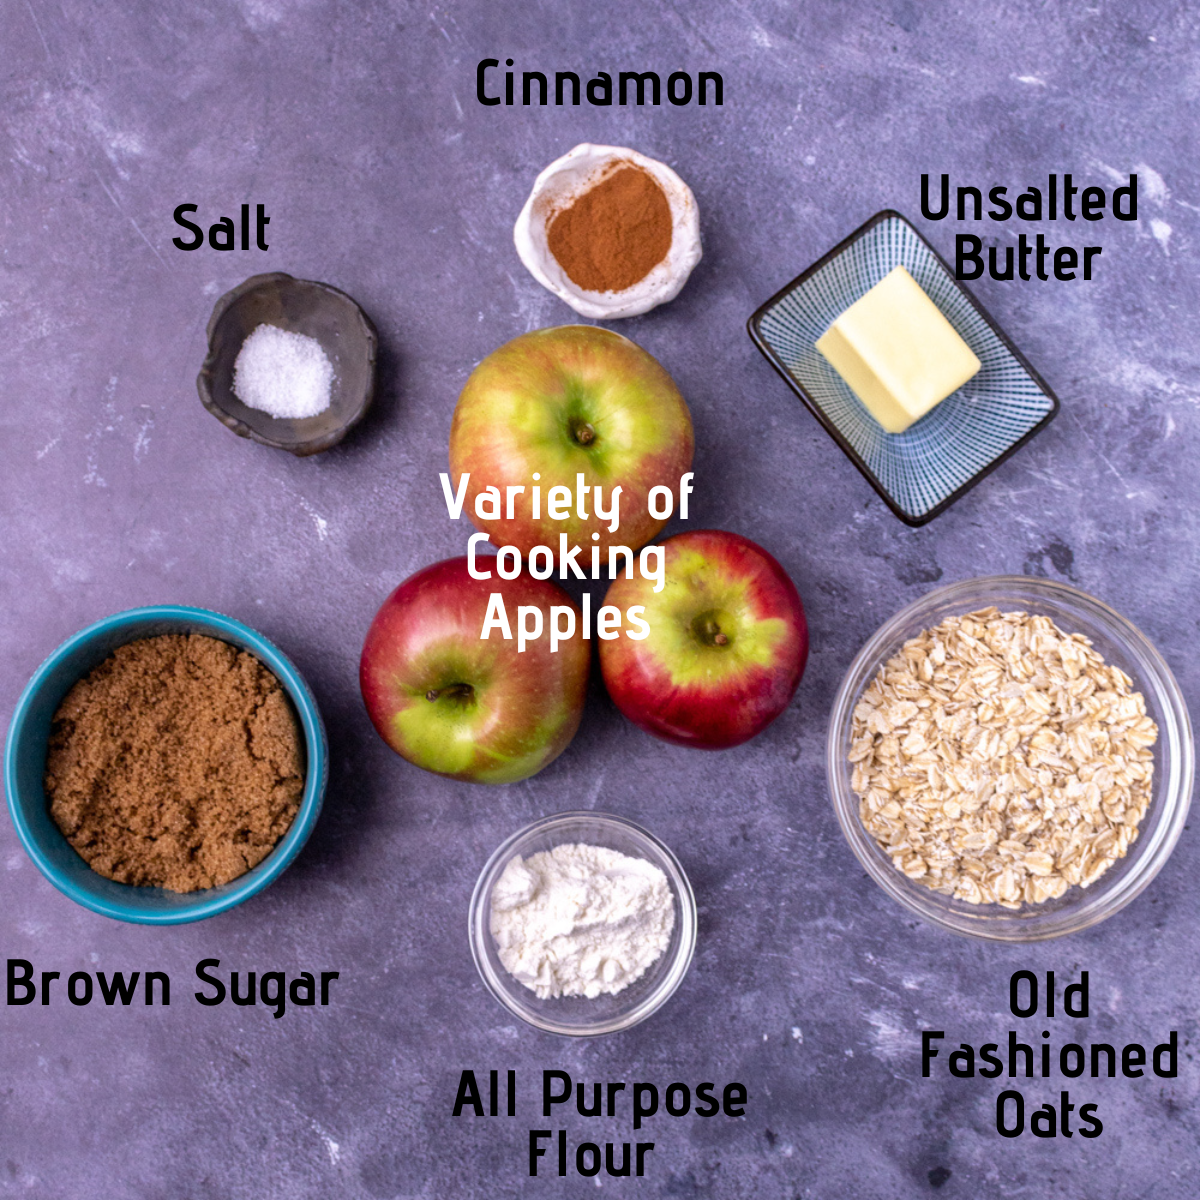 Raw ingredients laid out and labeled: Salt, ground cinnamon, unsalted butter, brown sugar, AP four, old fashioned oats and a variety of cooking apples.